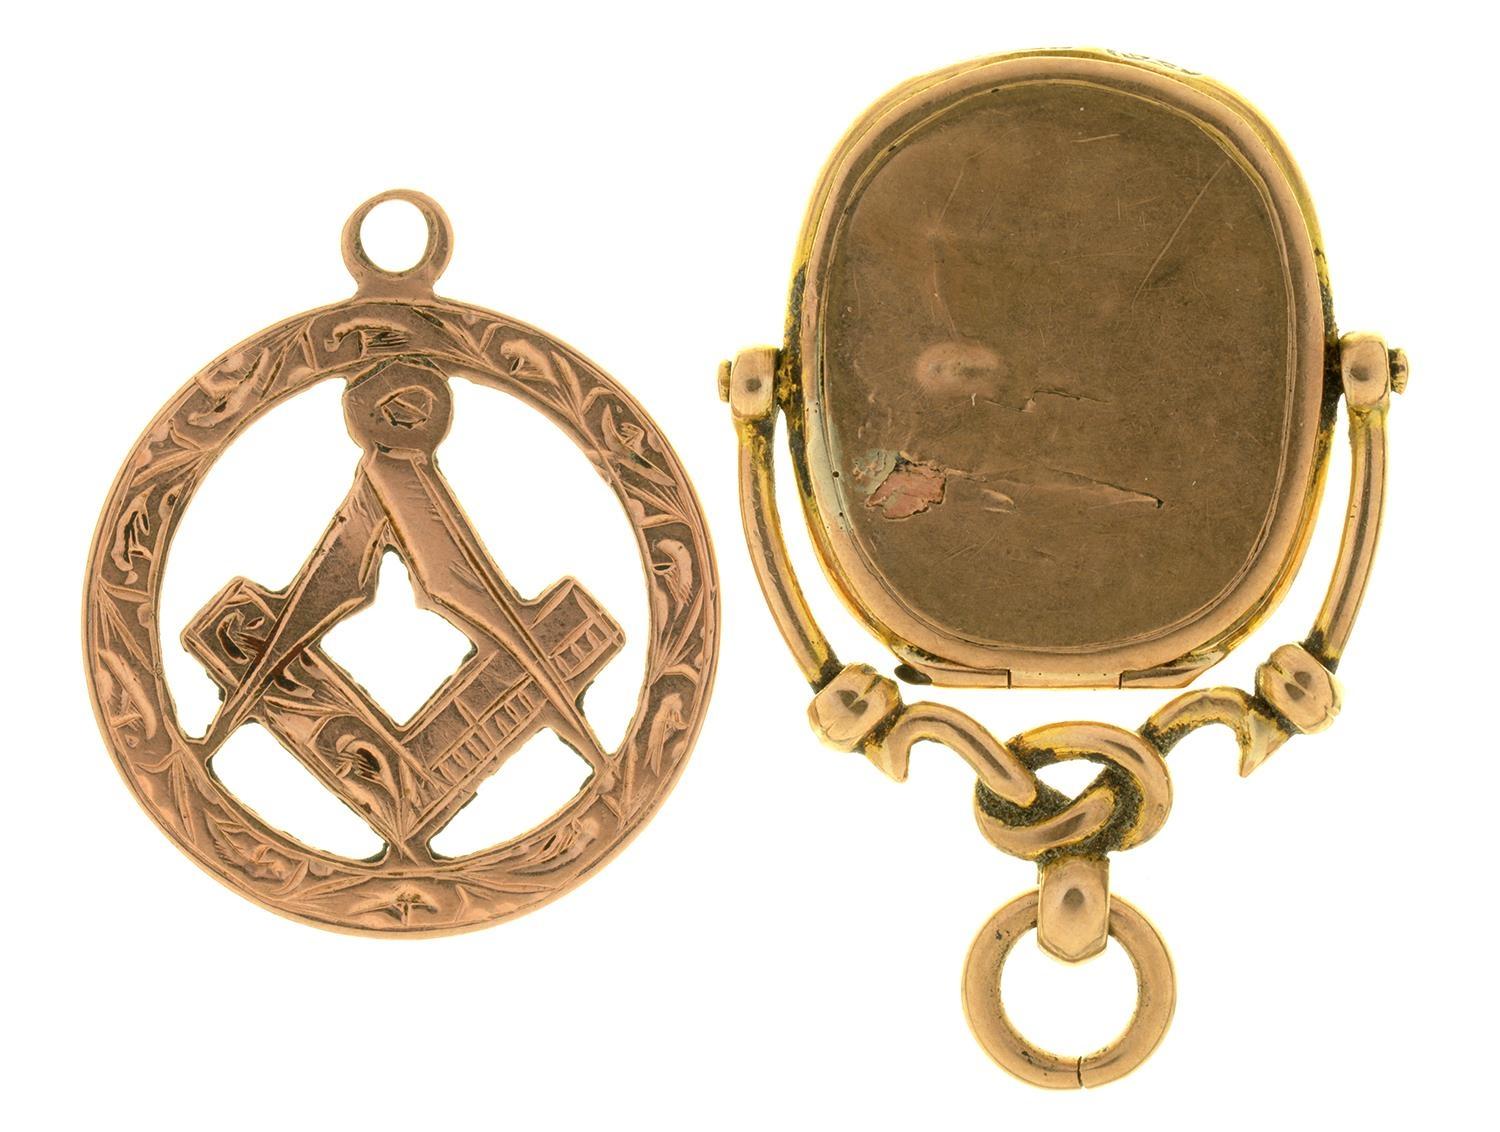 A PIERCED 9CT GOLD MASONIC PENDANT, 22MM D, CHESTER 1919 AND A CONTEMPORARY 9CT GOLD MASONIC - Image 2 of 2